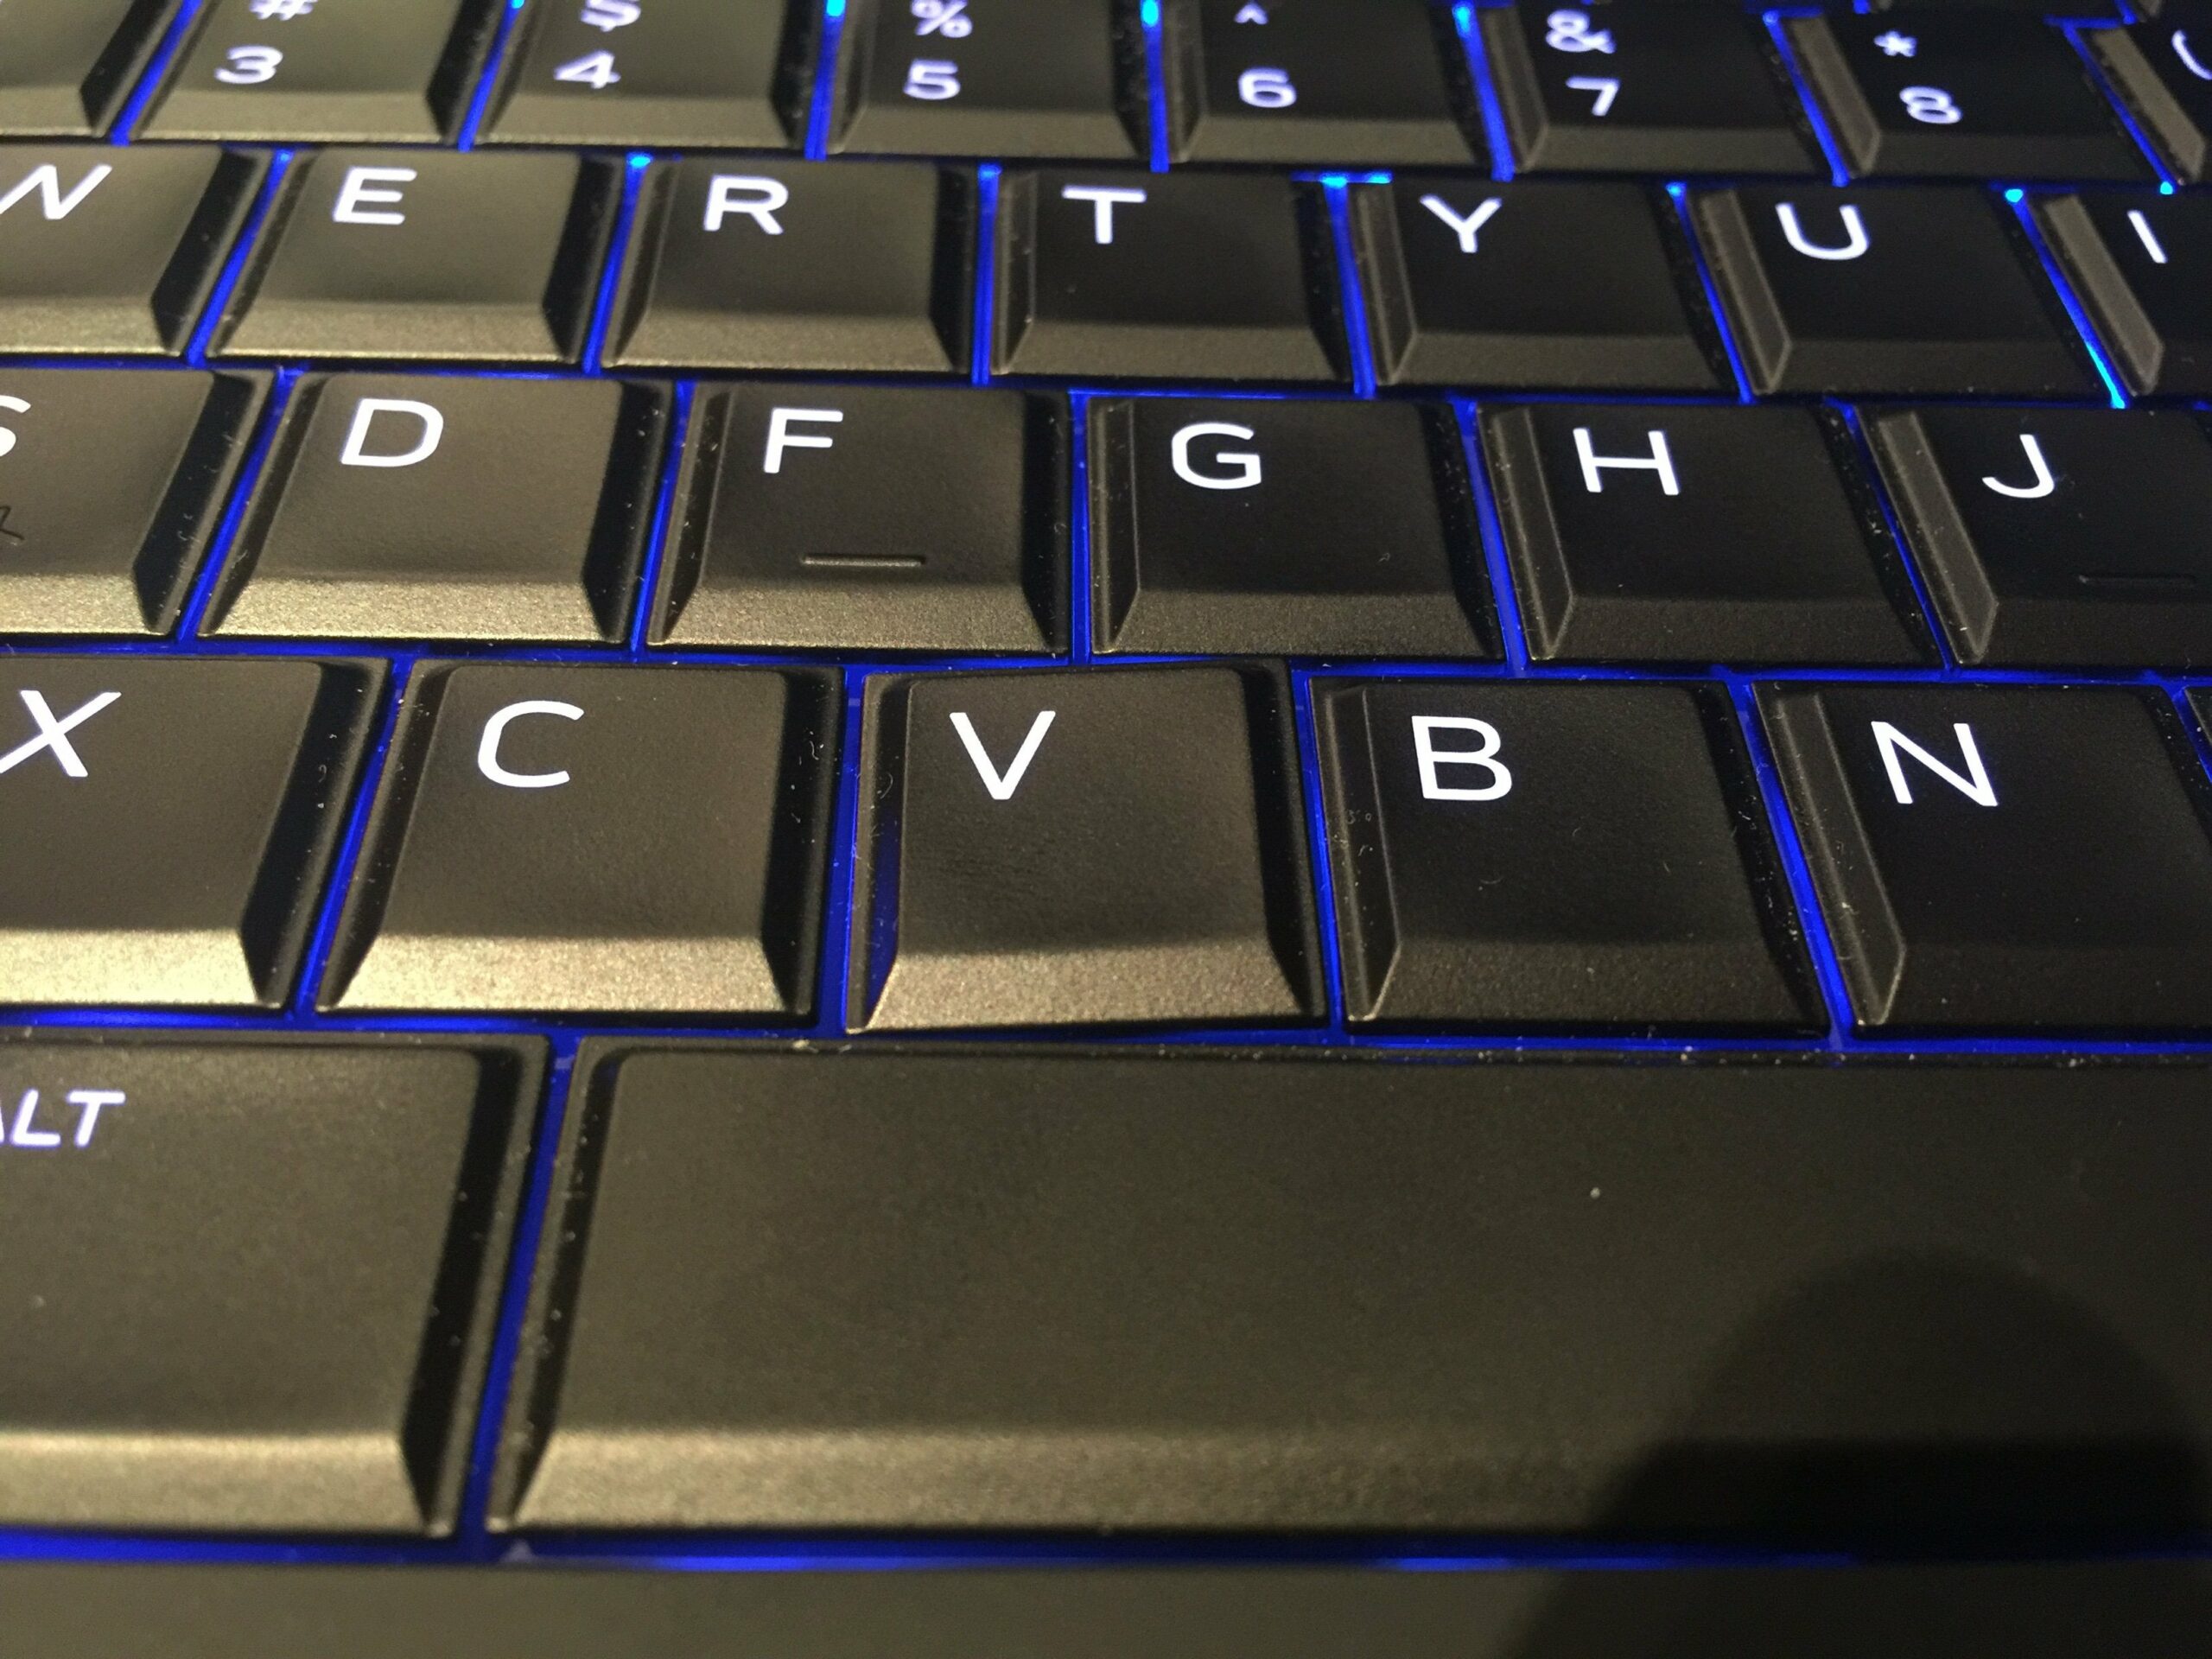 How to light up keyboard on laptop